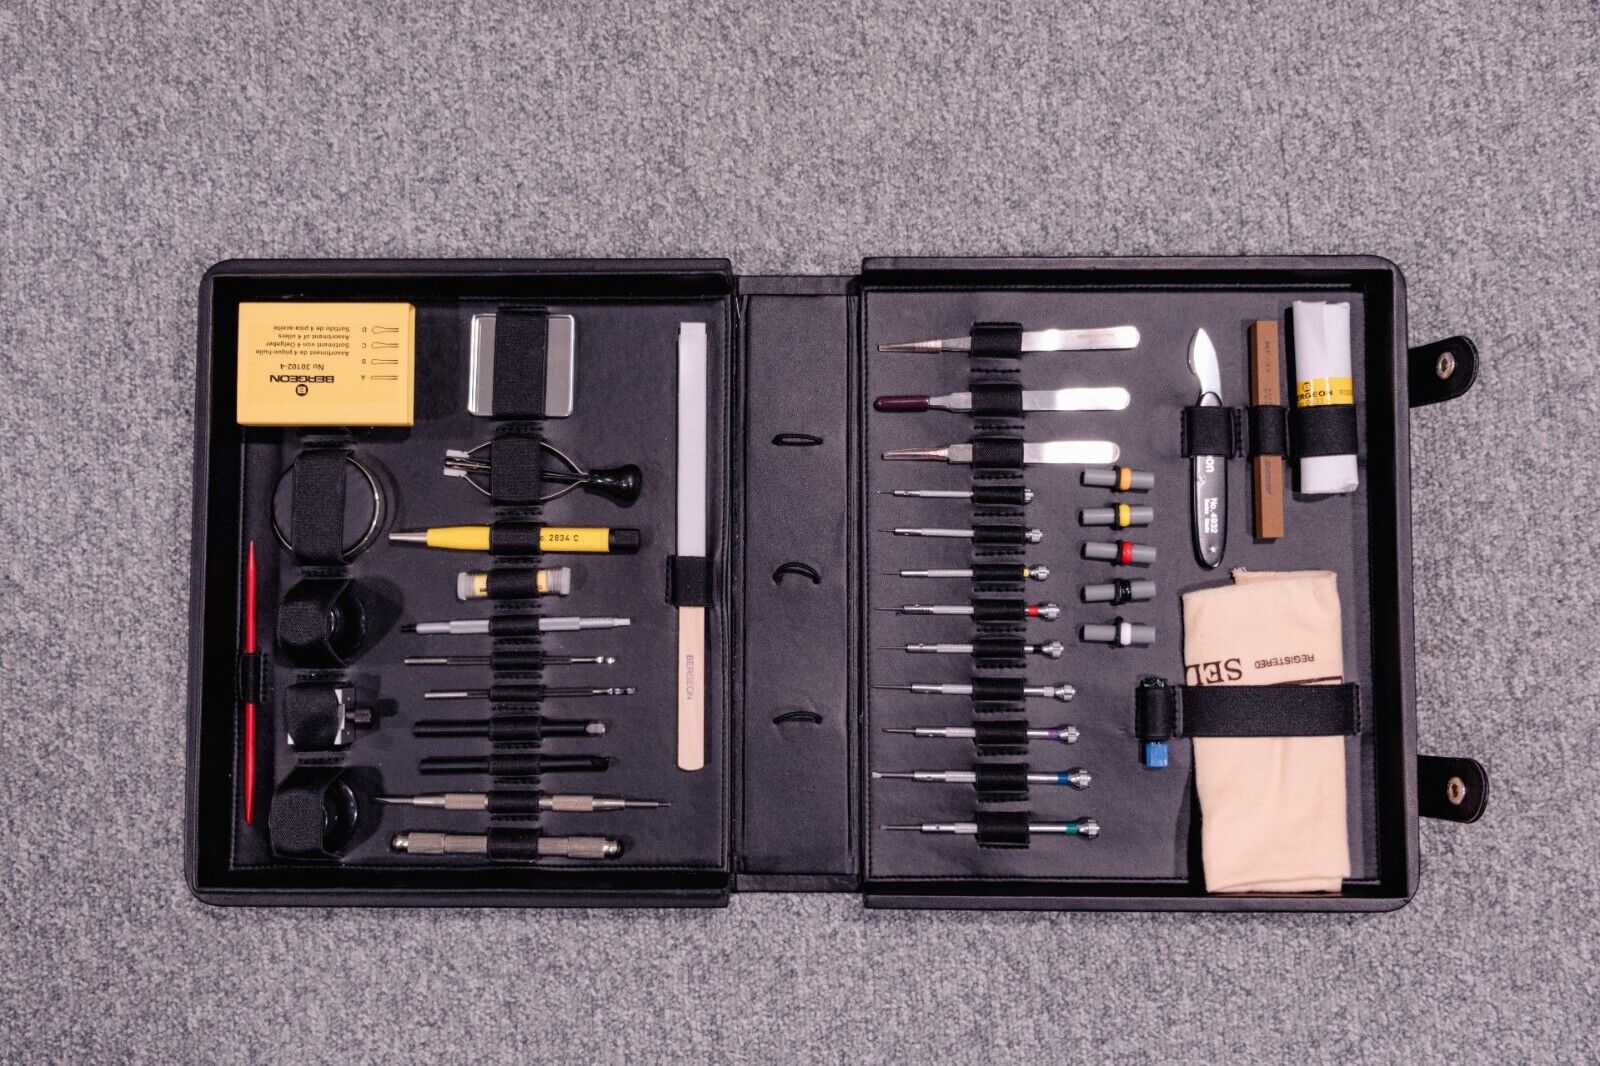 Bergeon 7817 Watchmakers Tools Kit 2016 (Excellent condition)